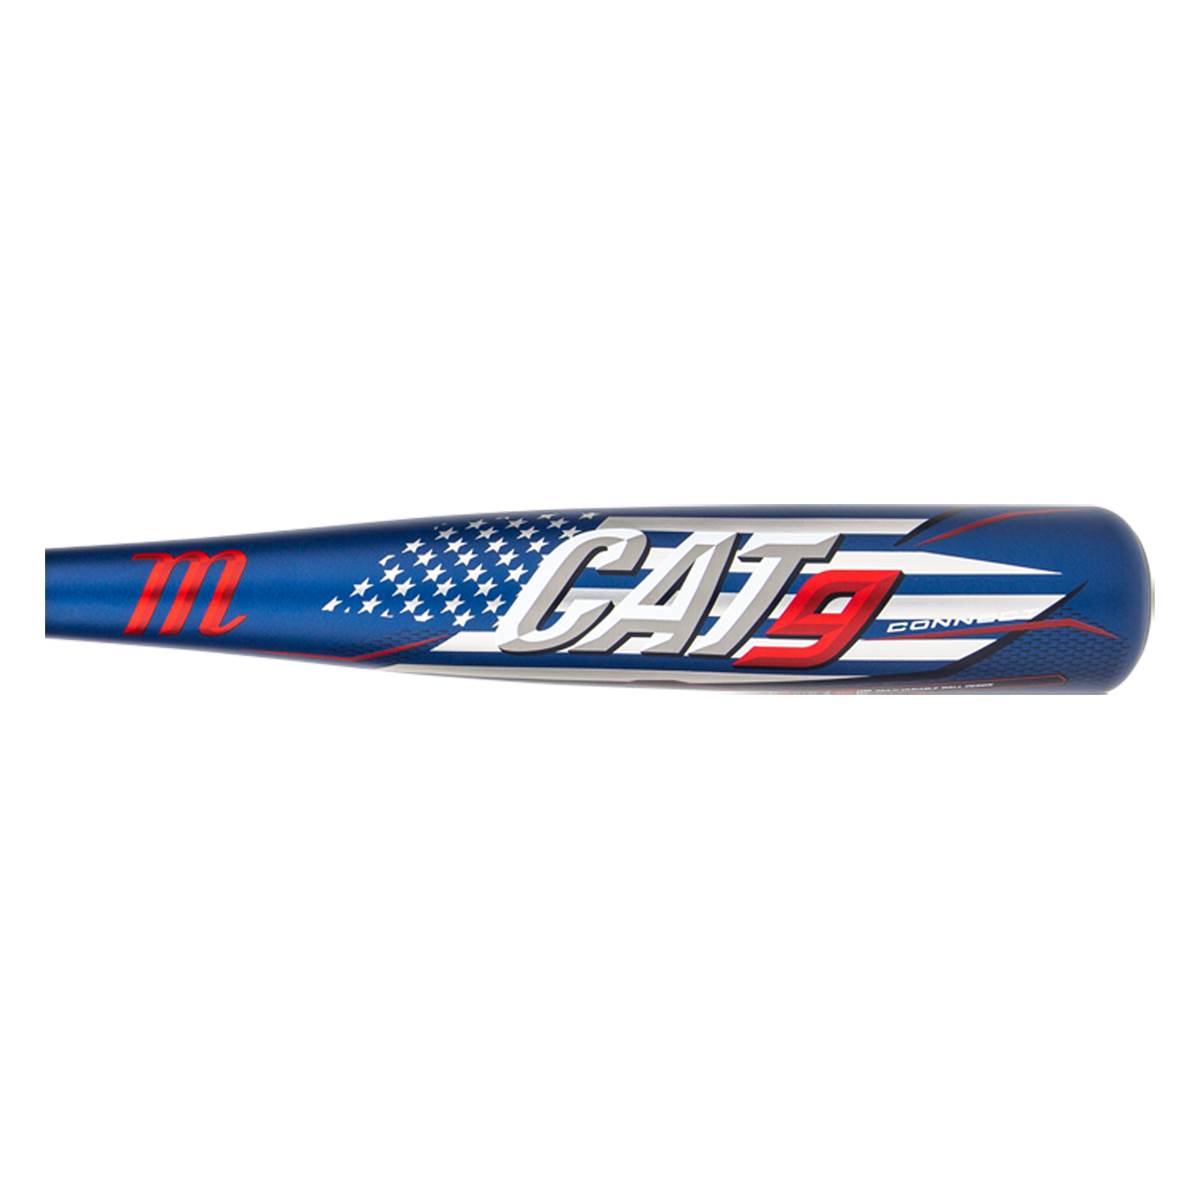 New Marucci CAT9 Connect Pastime -10 USSSA Baseball Bat Blue/Red